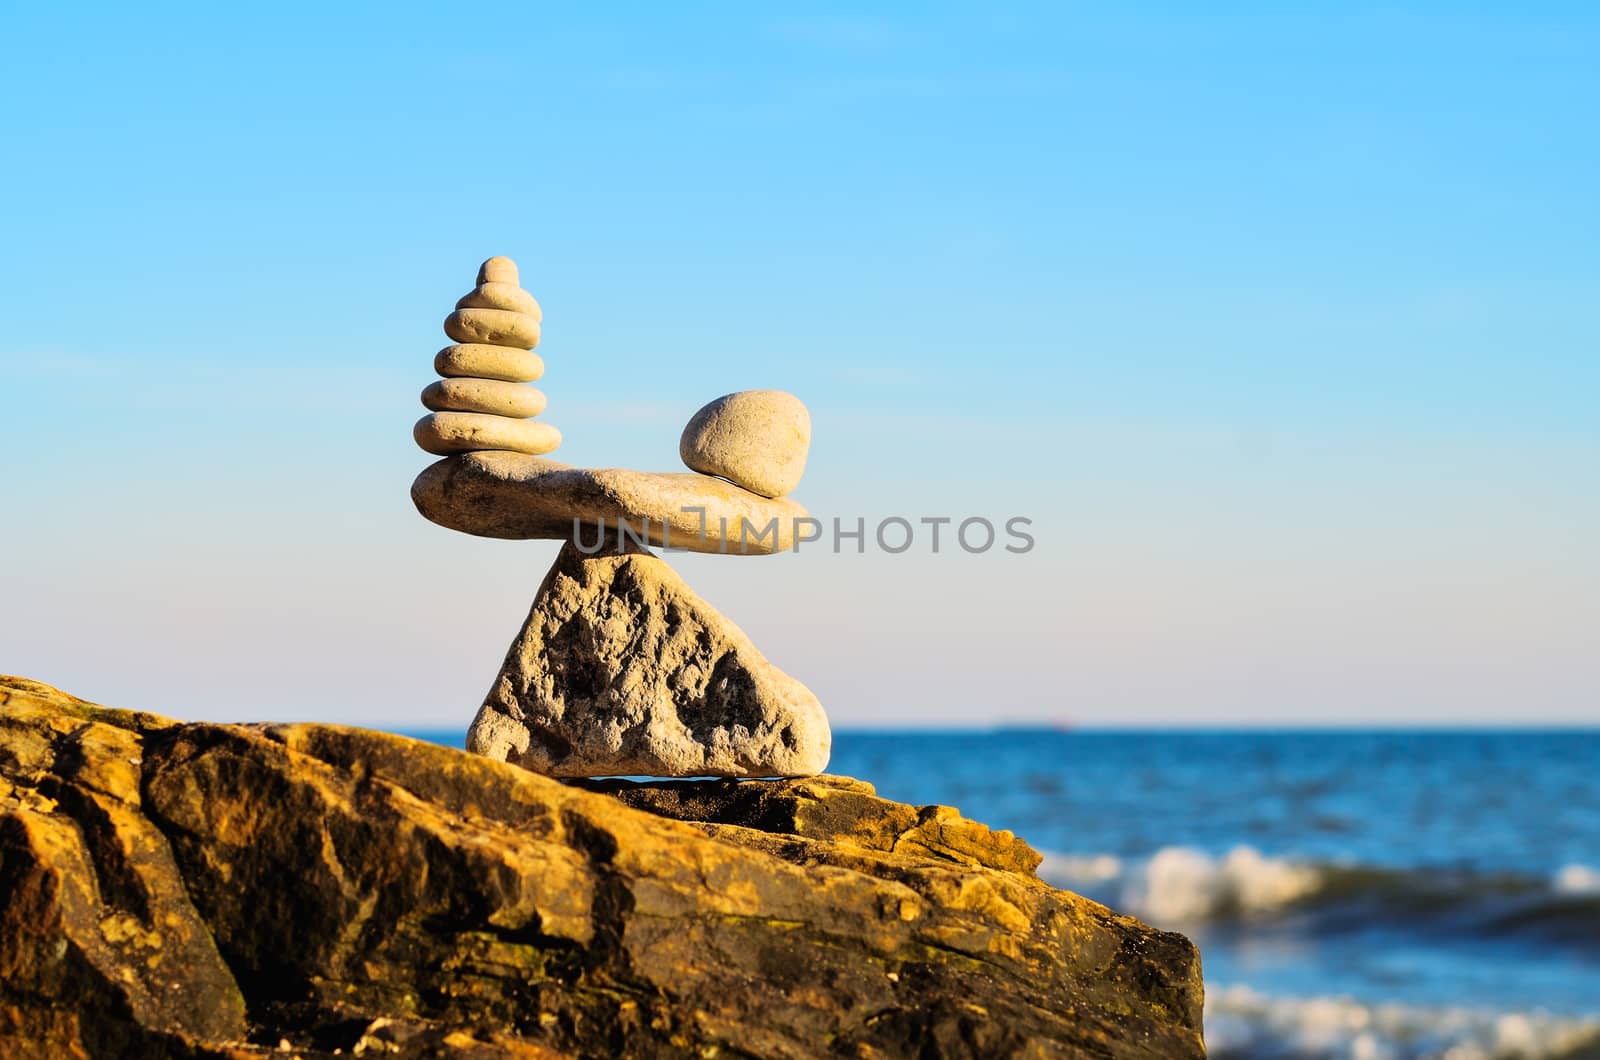 Well-balanced of stones by styf22